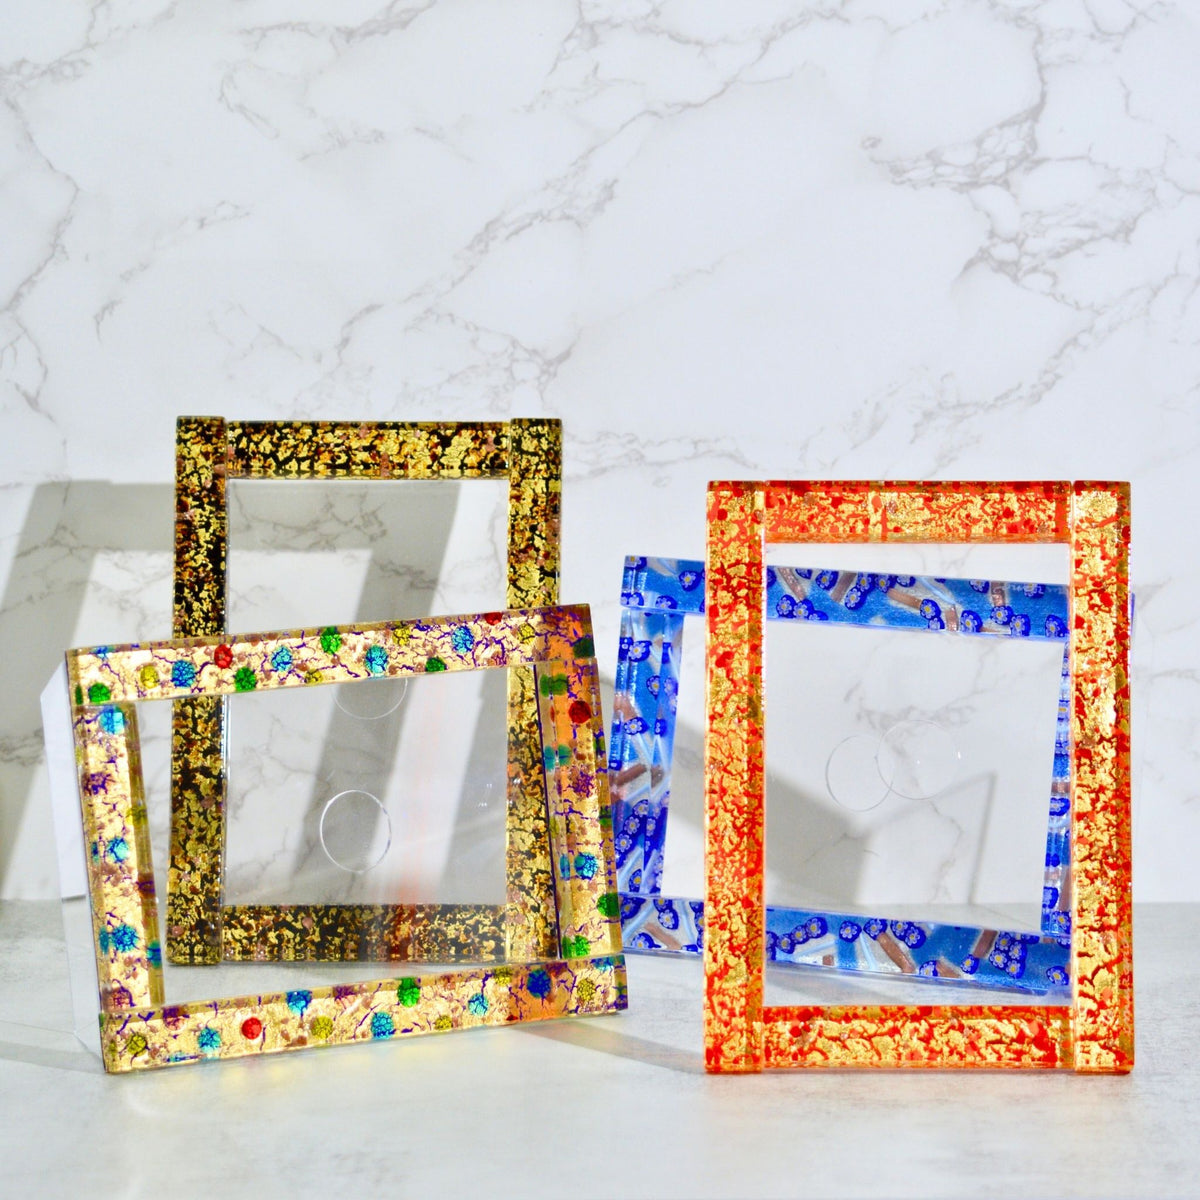 Red &amp; Gold Murano Glass 5&quot; x 7&quot; Photo Frame, Made in Italy - My Italian Decor